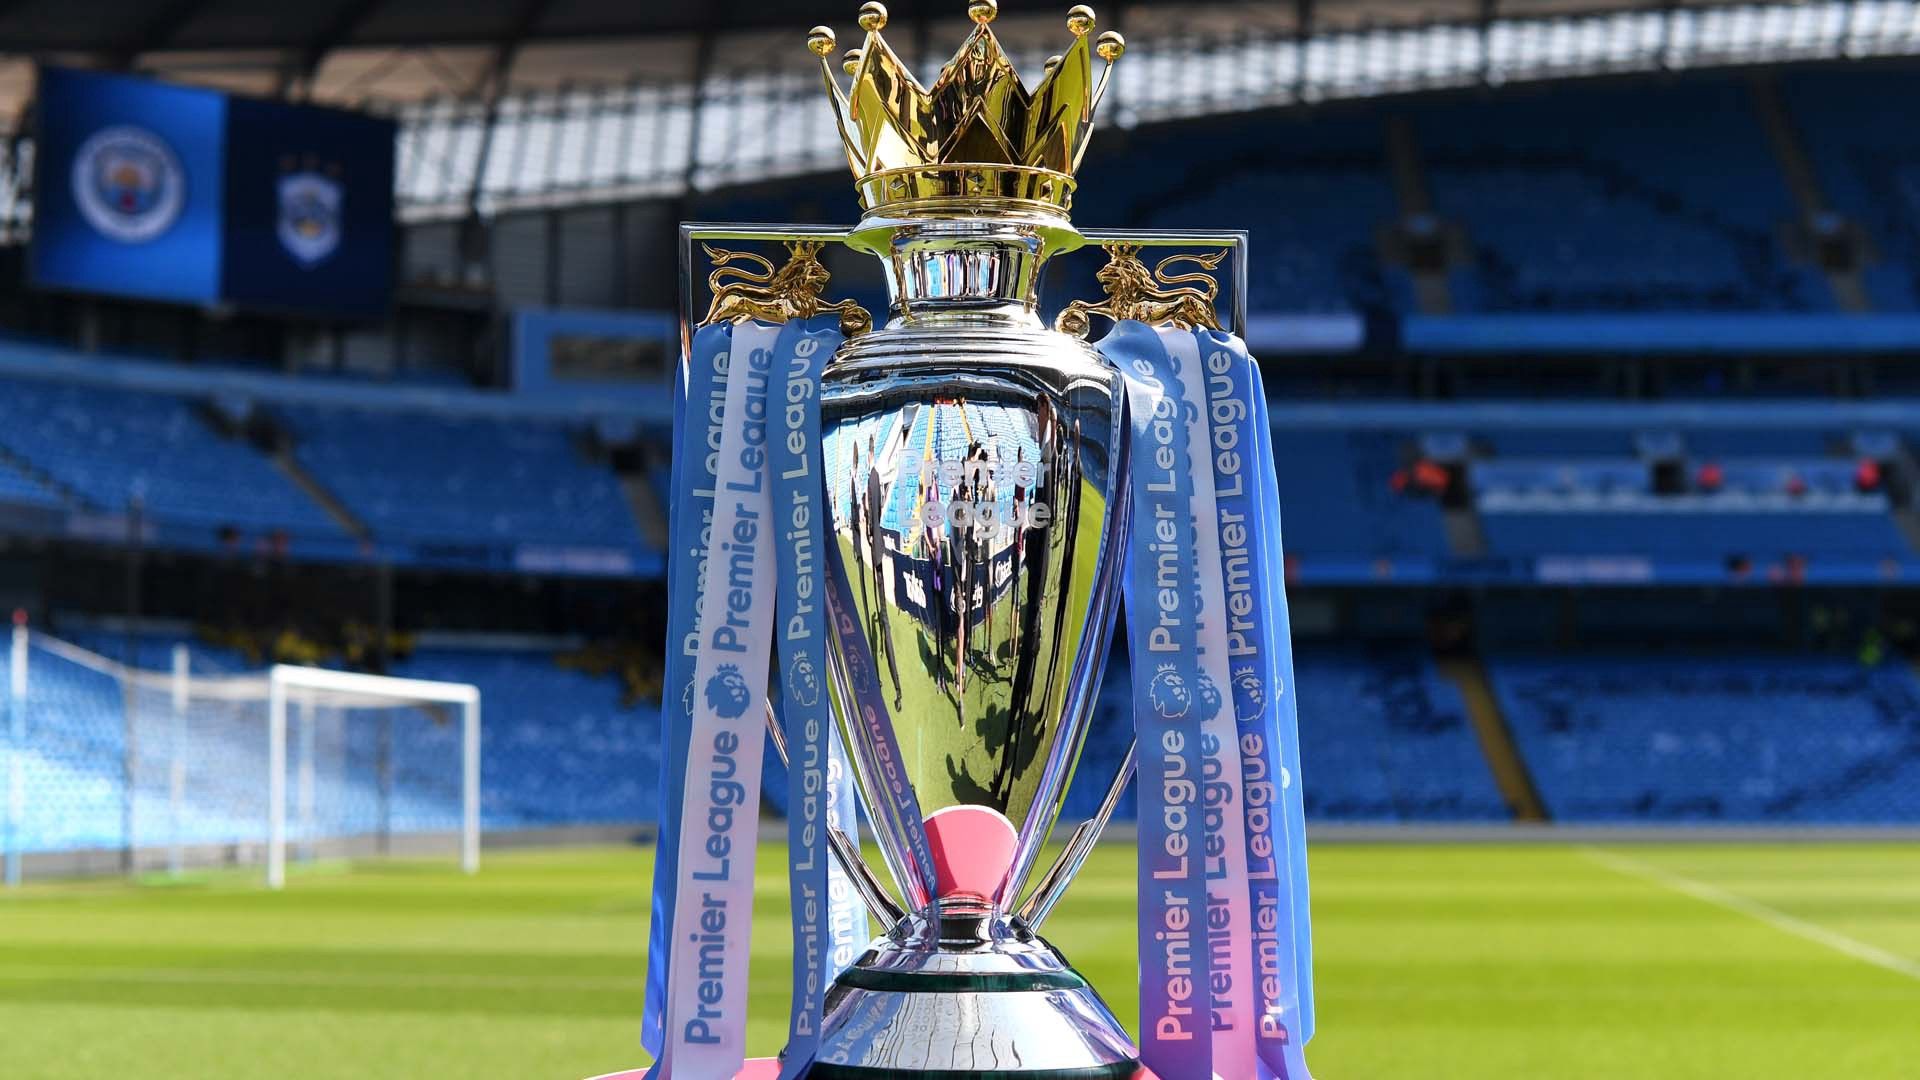  The Premier League trophy sits on the pitch inside an empty stadium.